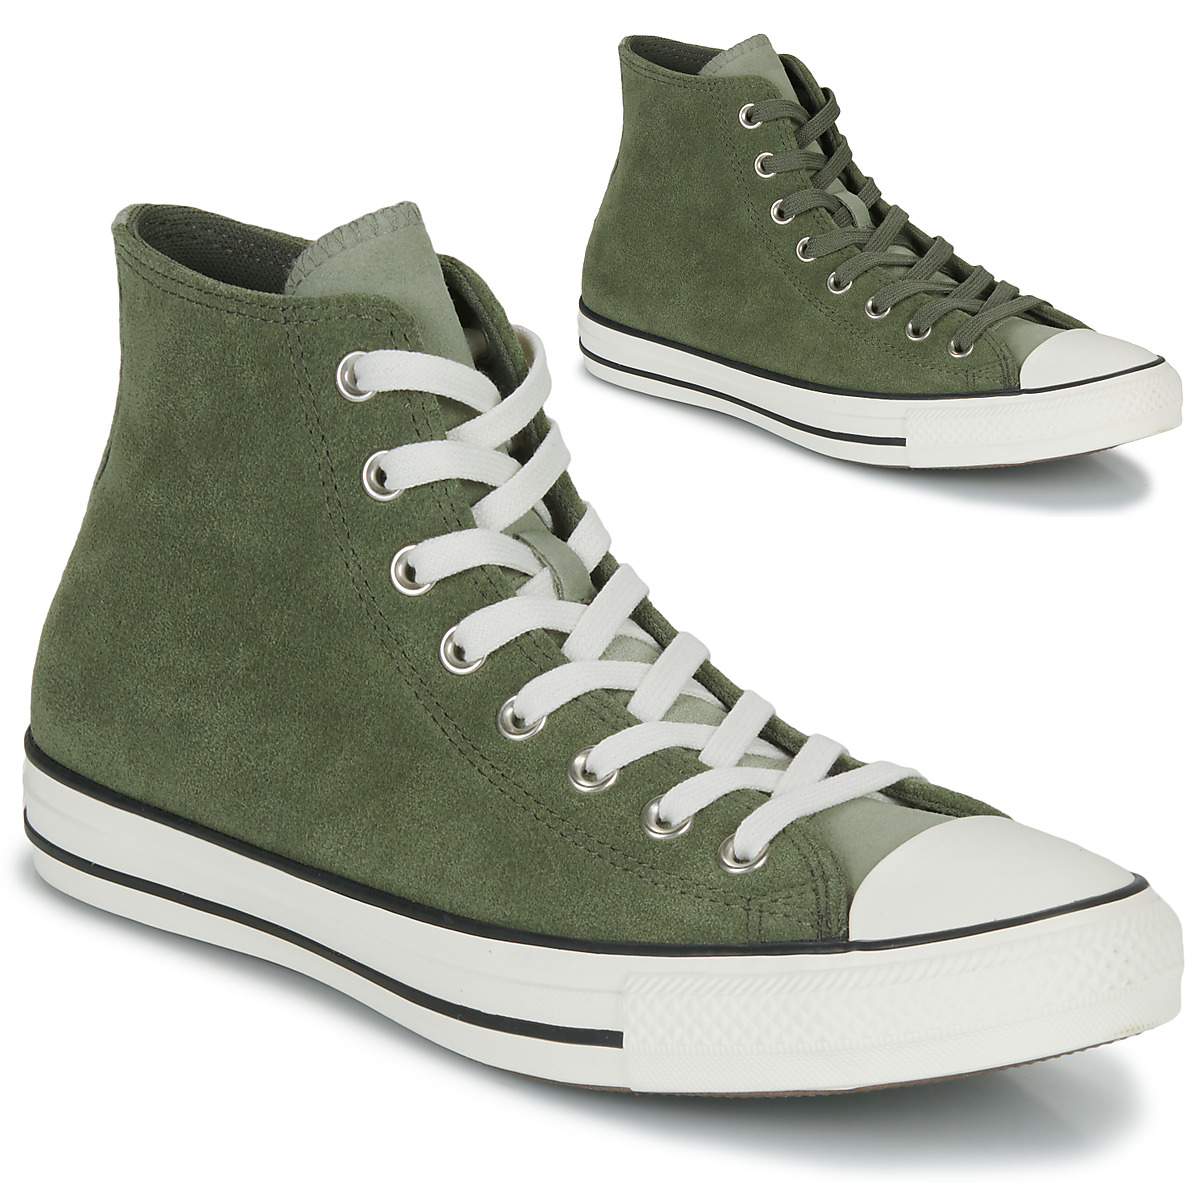 Converse Vert Chuck Taylor All Star Earthy Suede hQVRpI